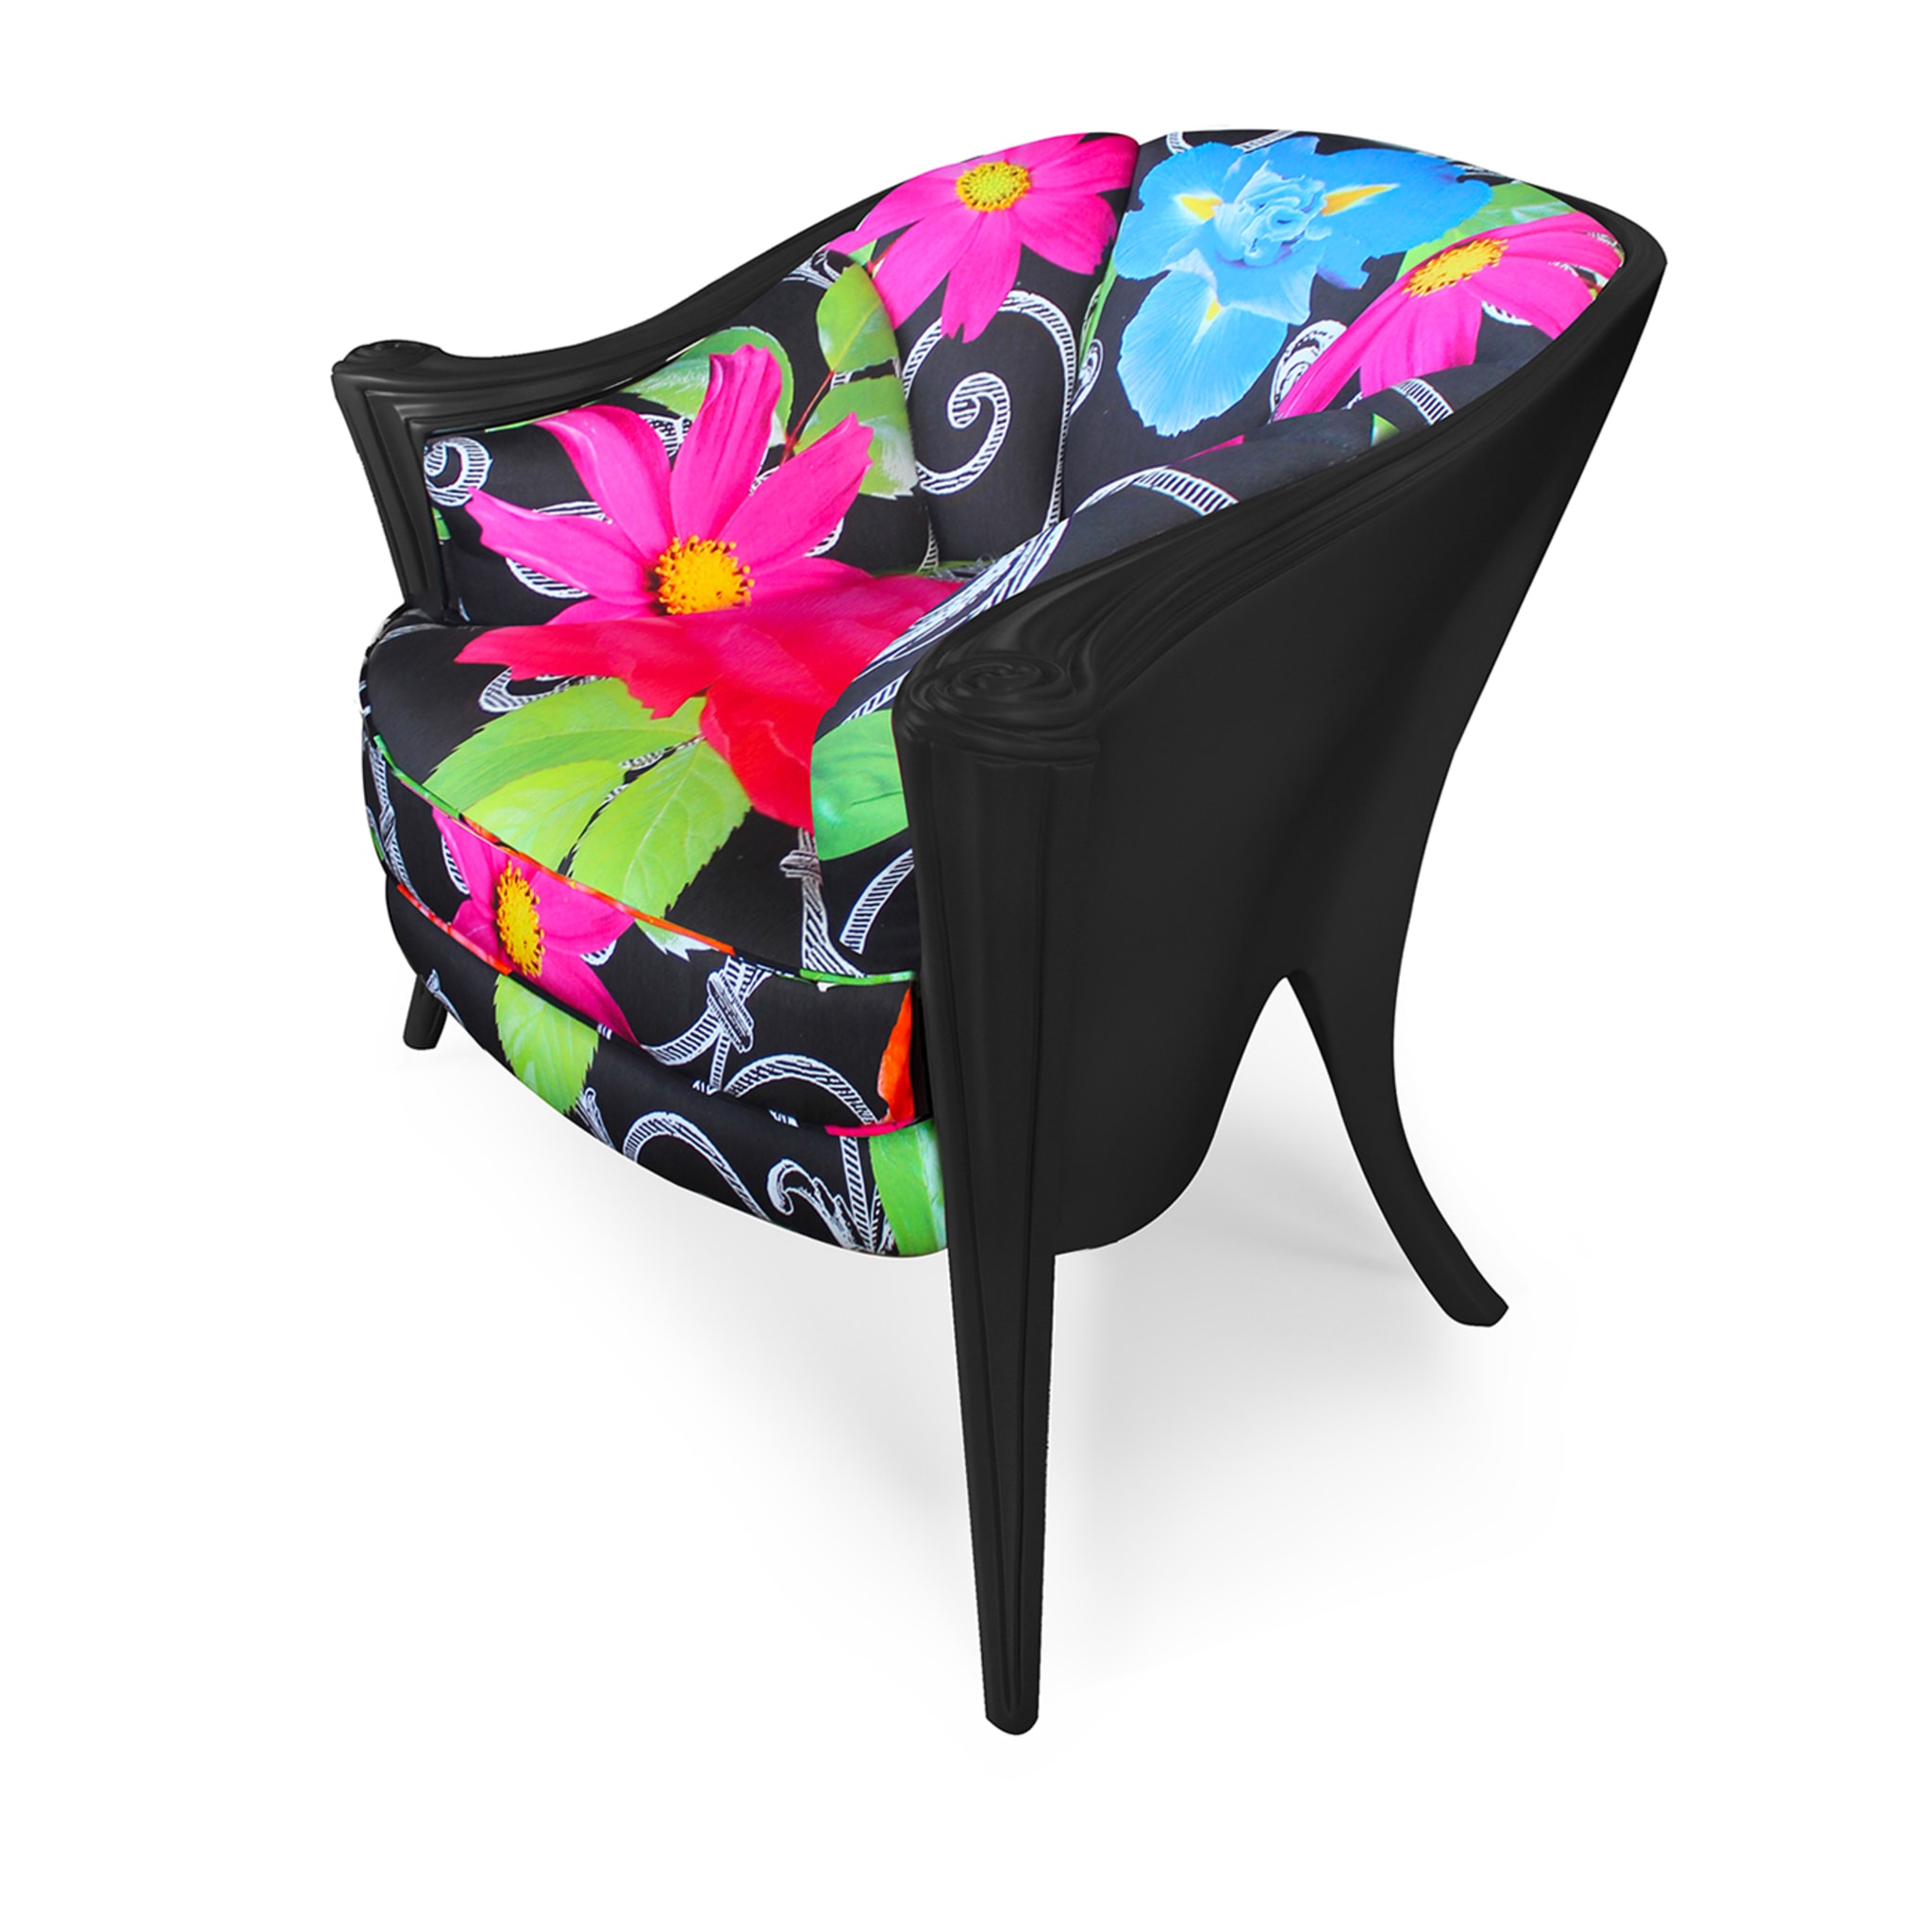 Opus Futura Black Flower and lacquer armchair By Carlo Rampazzi - Alternative view 1